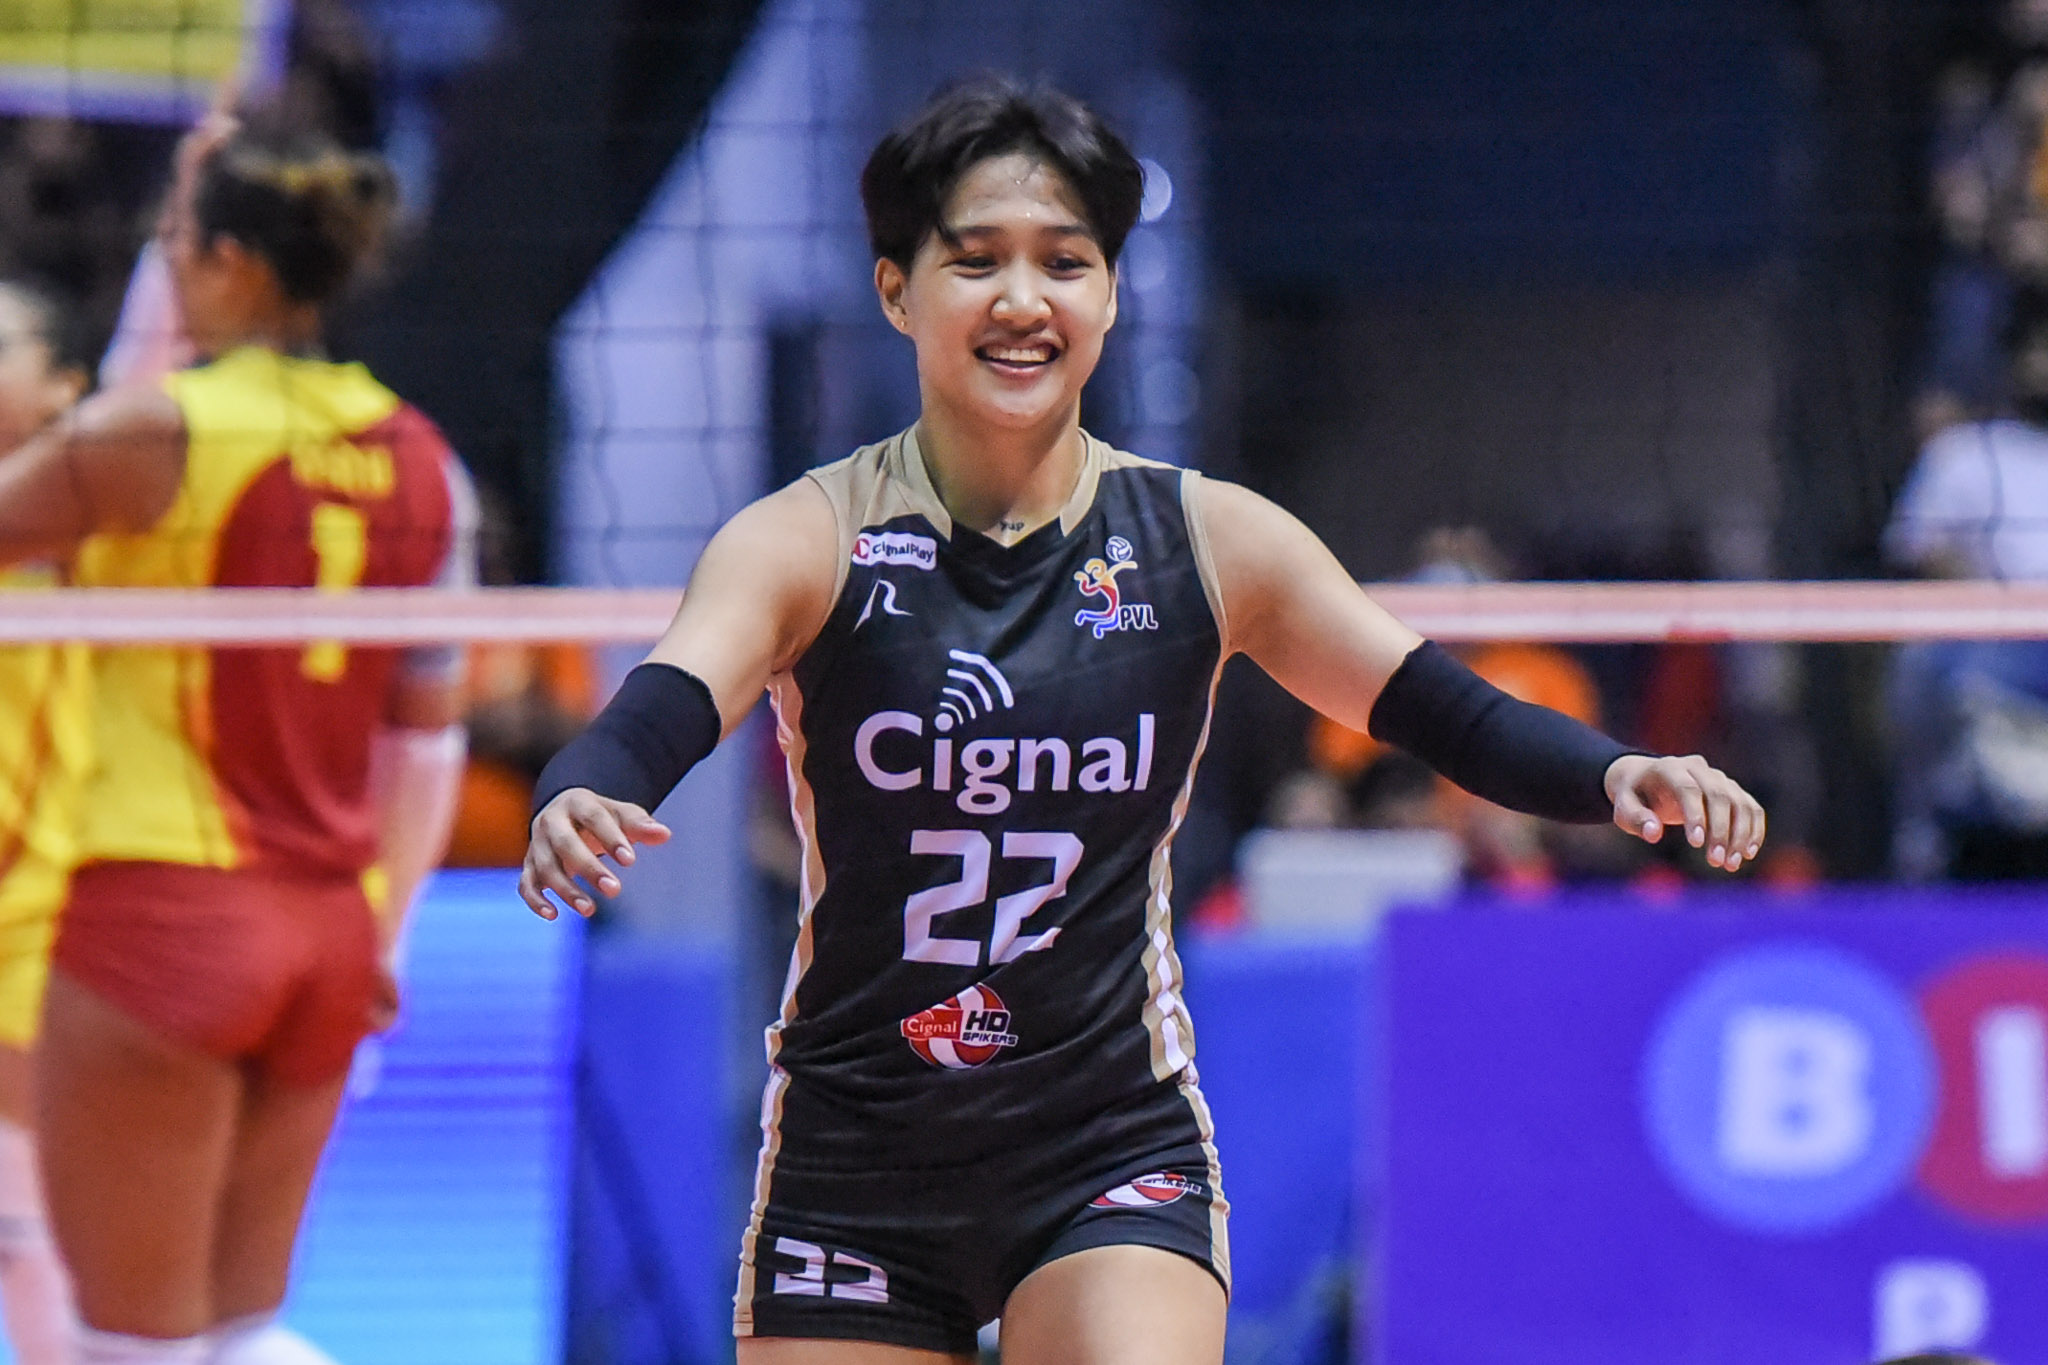 PVL-Reinforced-F2-vs.-Cignal-Gel-Cayuna-3132 With or without an import, Cayuna confident Cignal will deliver News PVL Volleyball  - philippine sports news